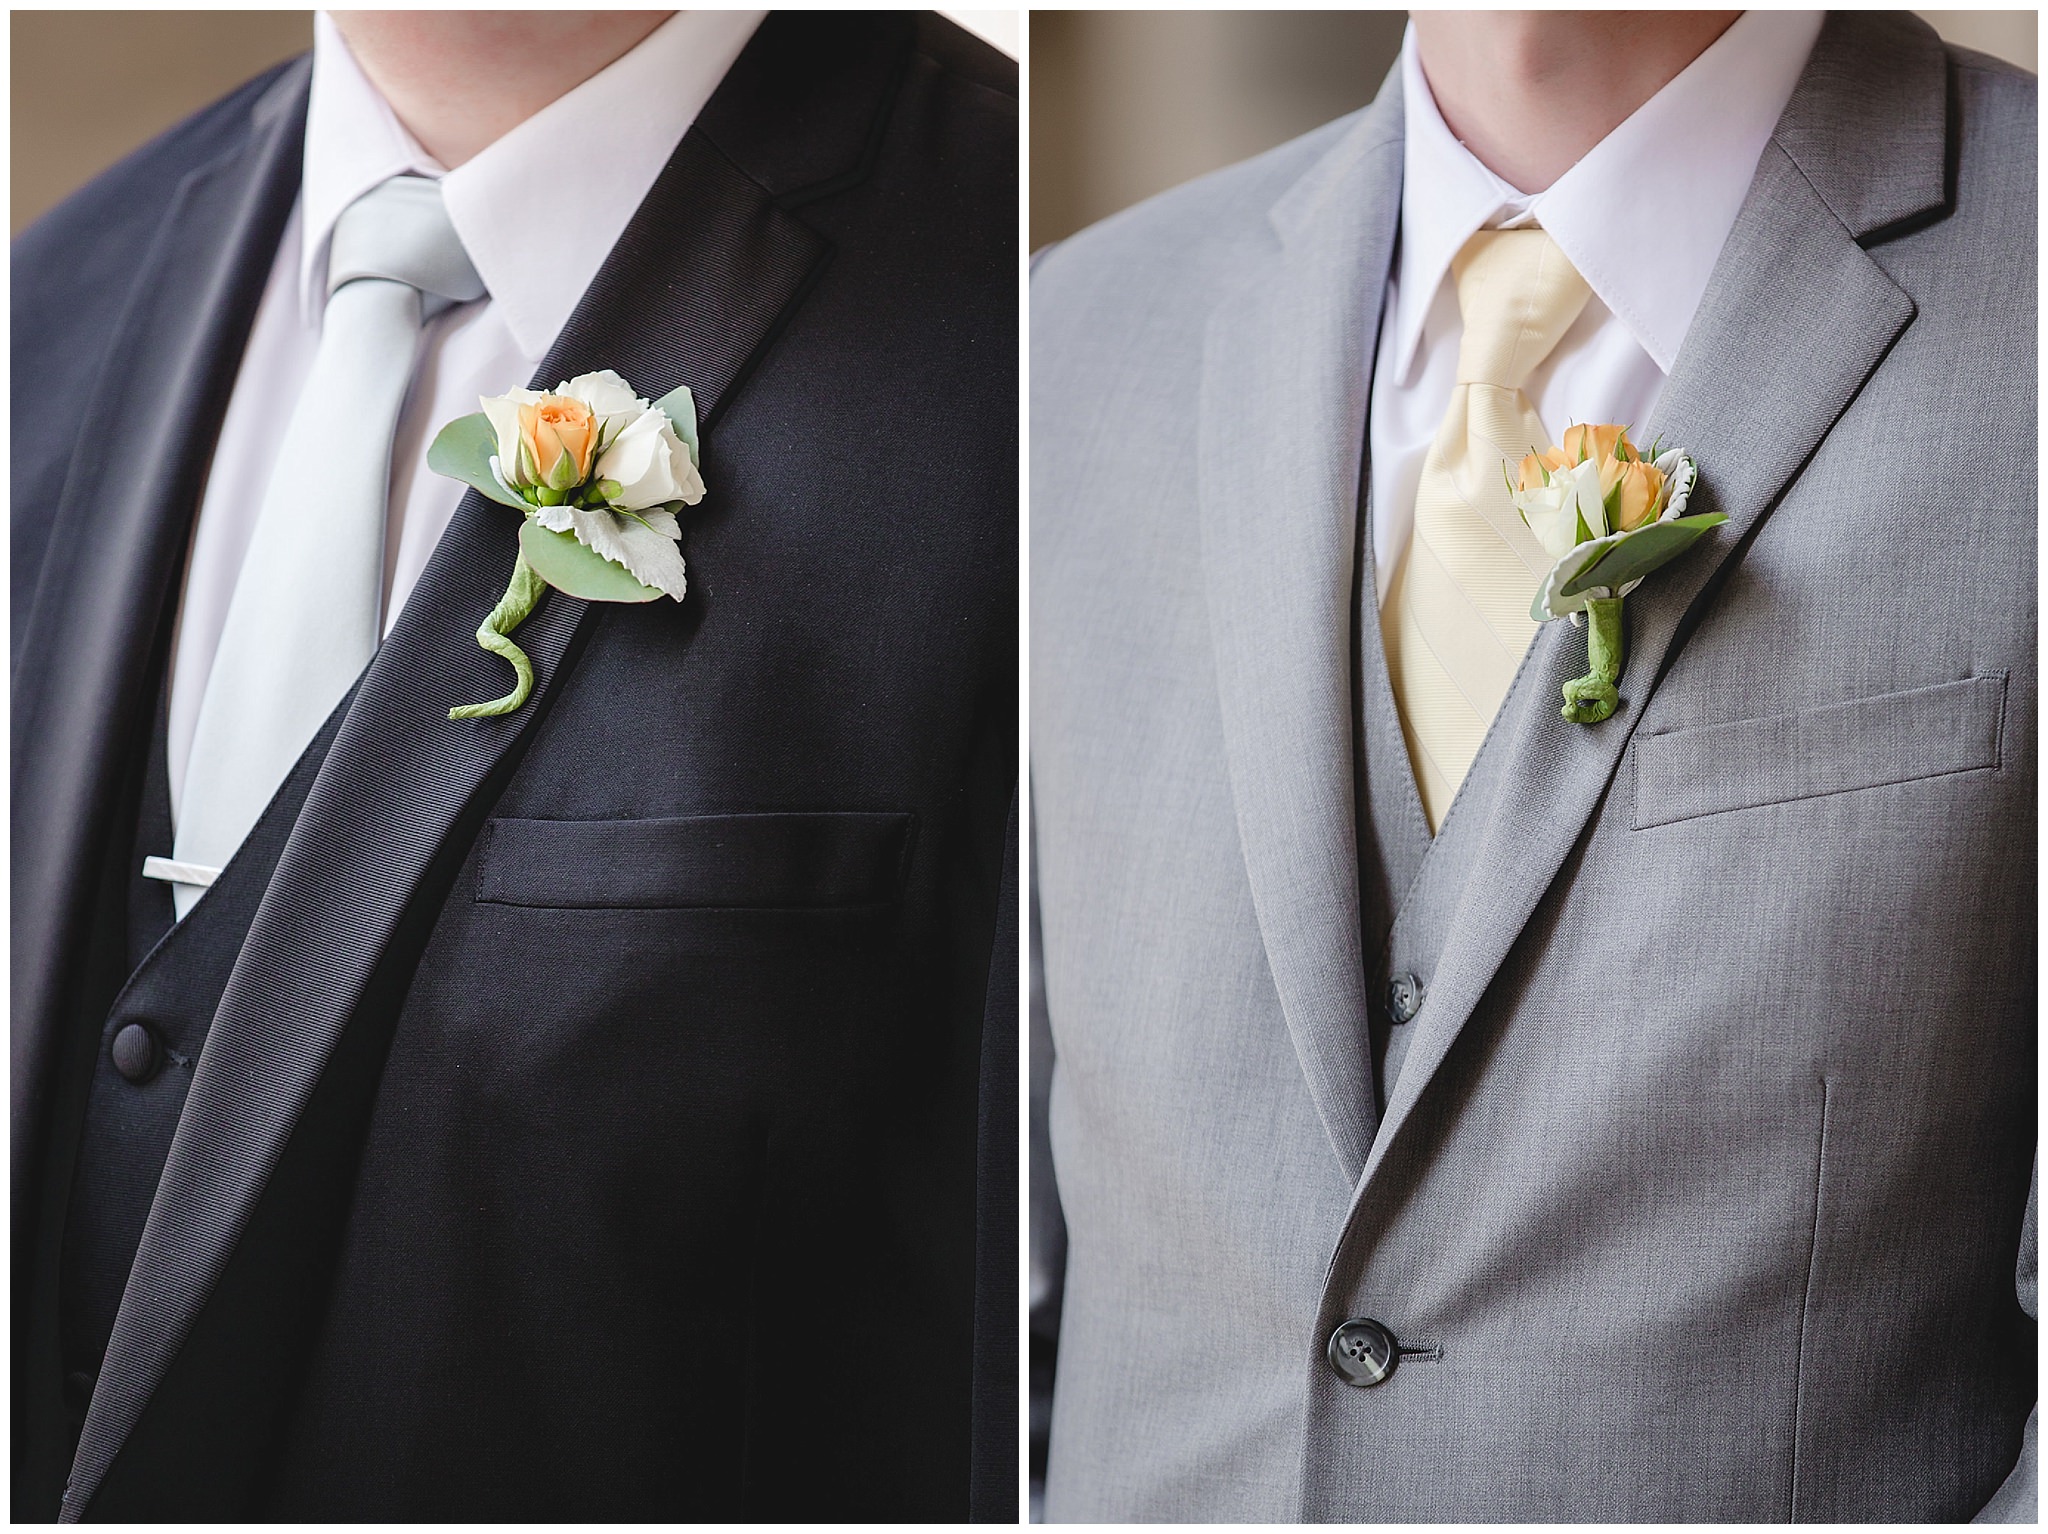 Groom & groomsmen boutonnieres by the Blooming Dahlia of Mt. Lebanon in Pittsburgh